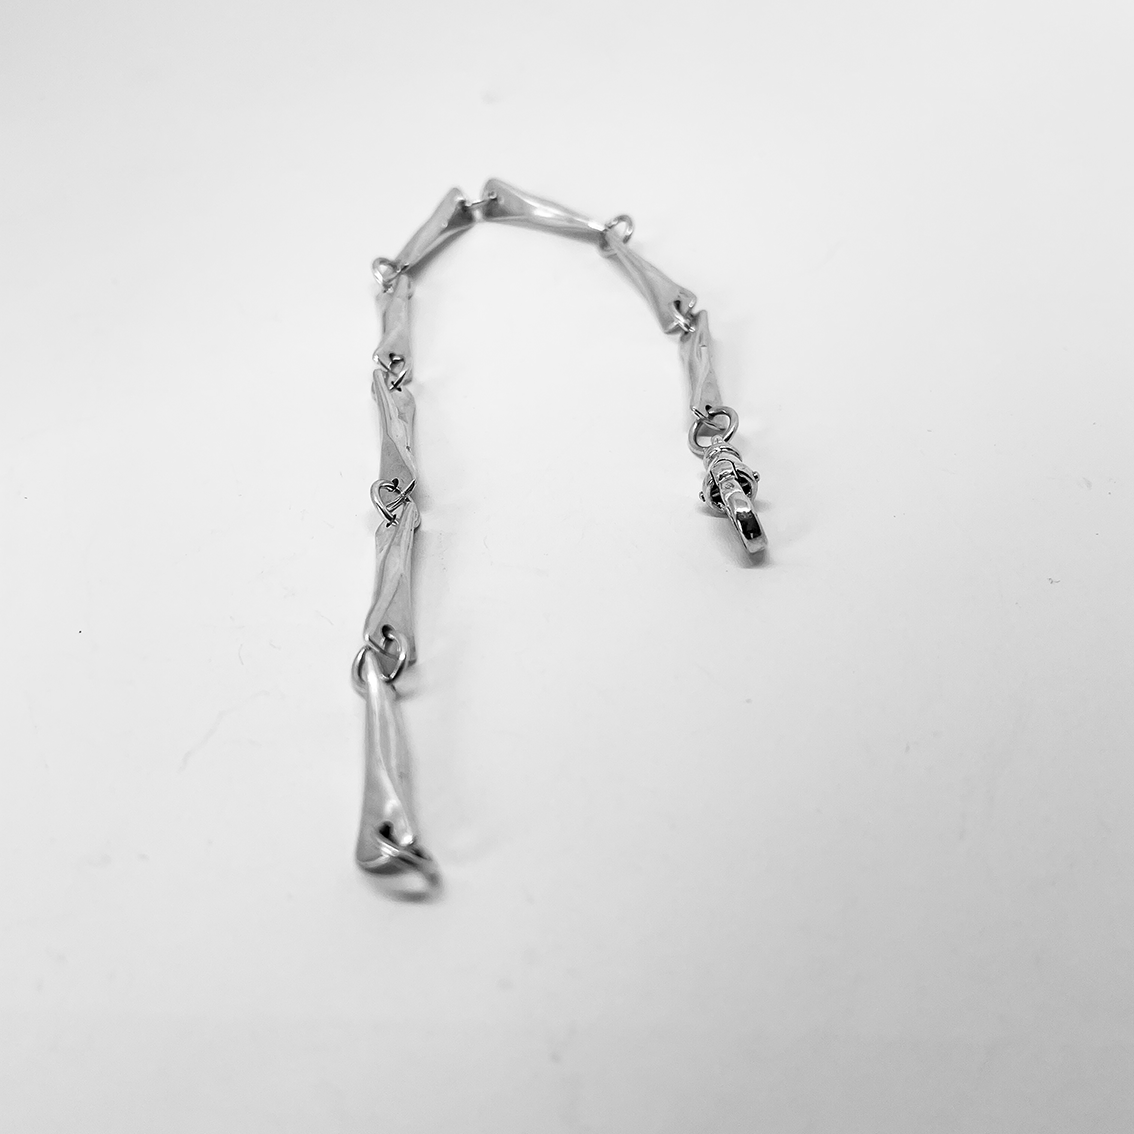 View of the Modernist Butterfly link chain bracelet